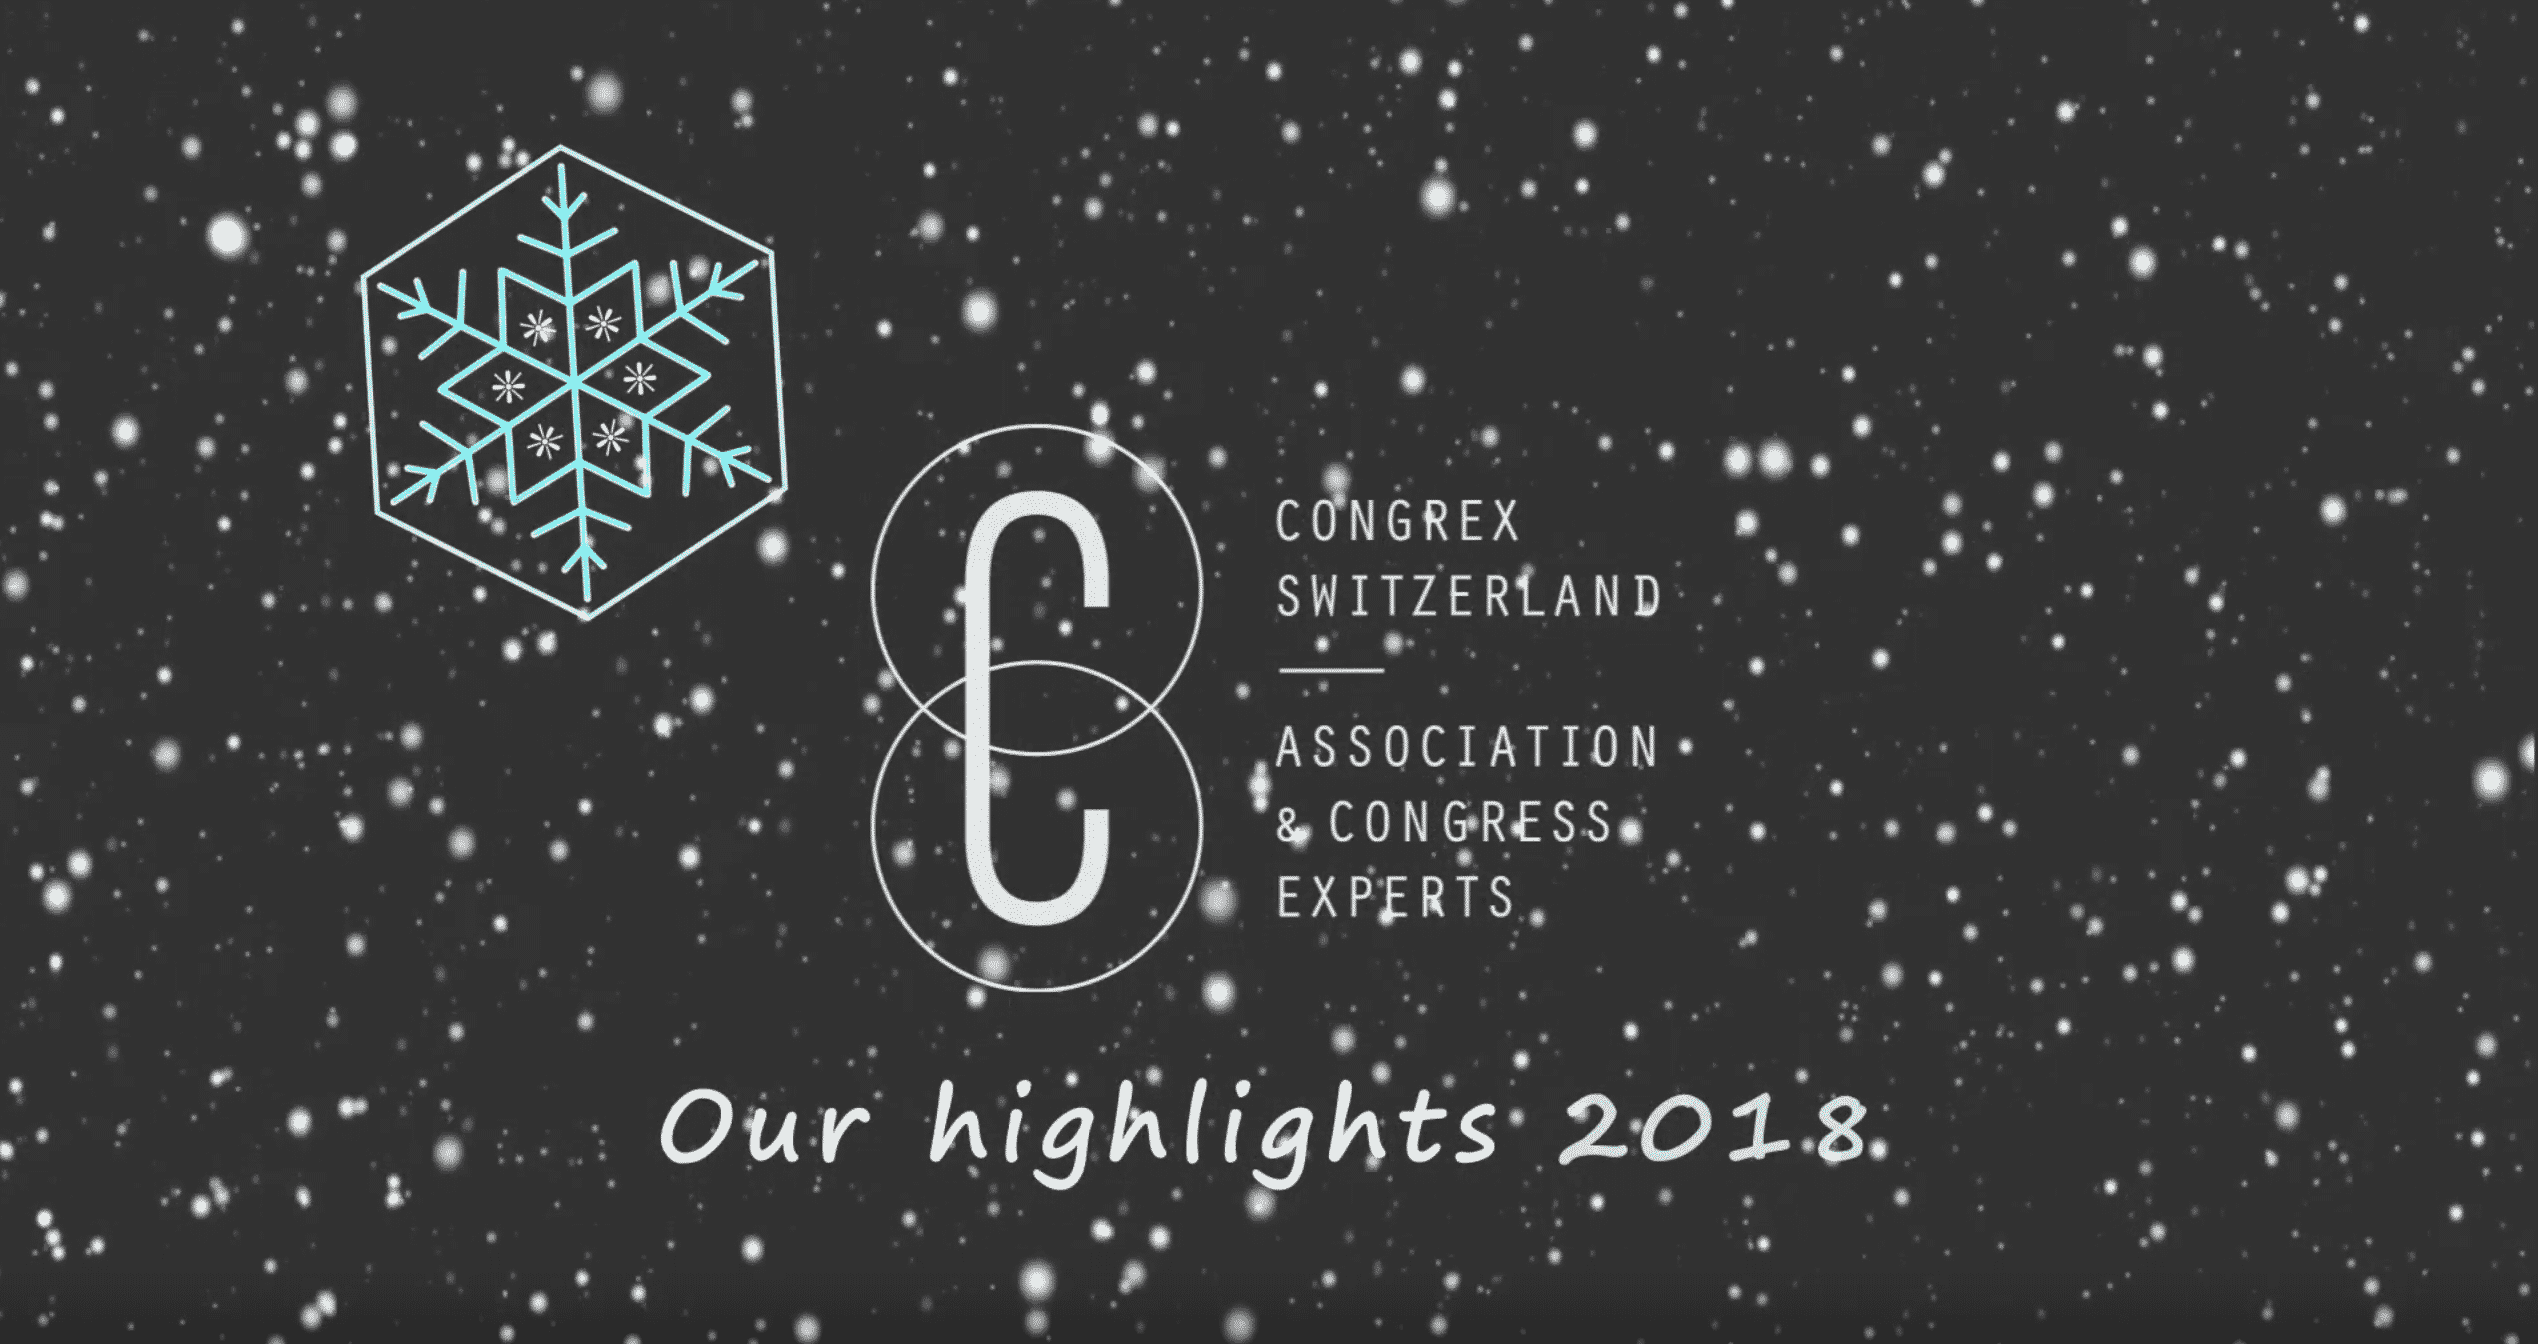 Year-End Greetings 2018 by our CEO Julia Bicher